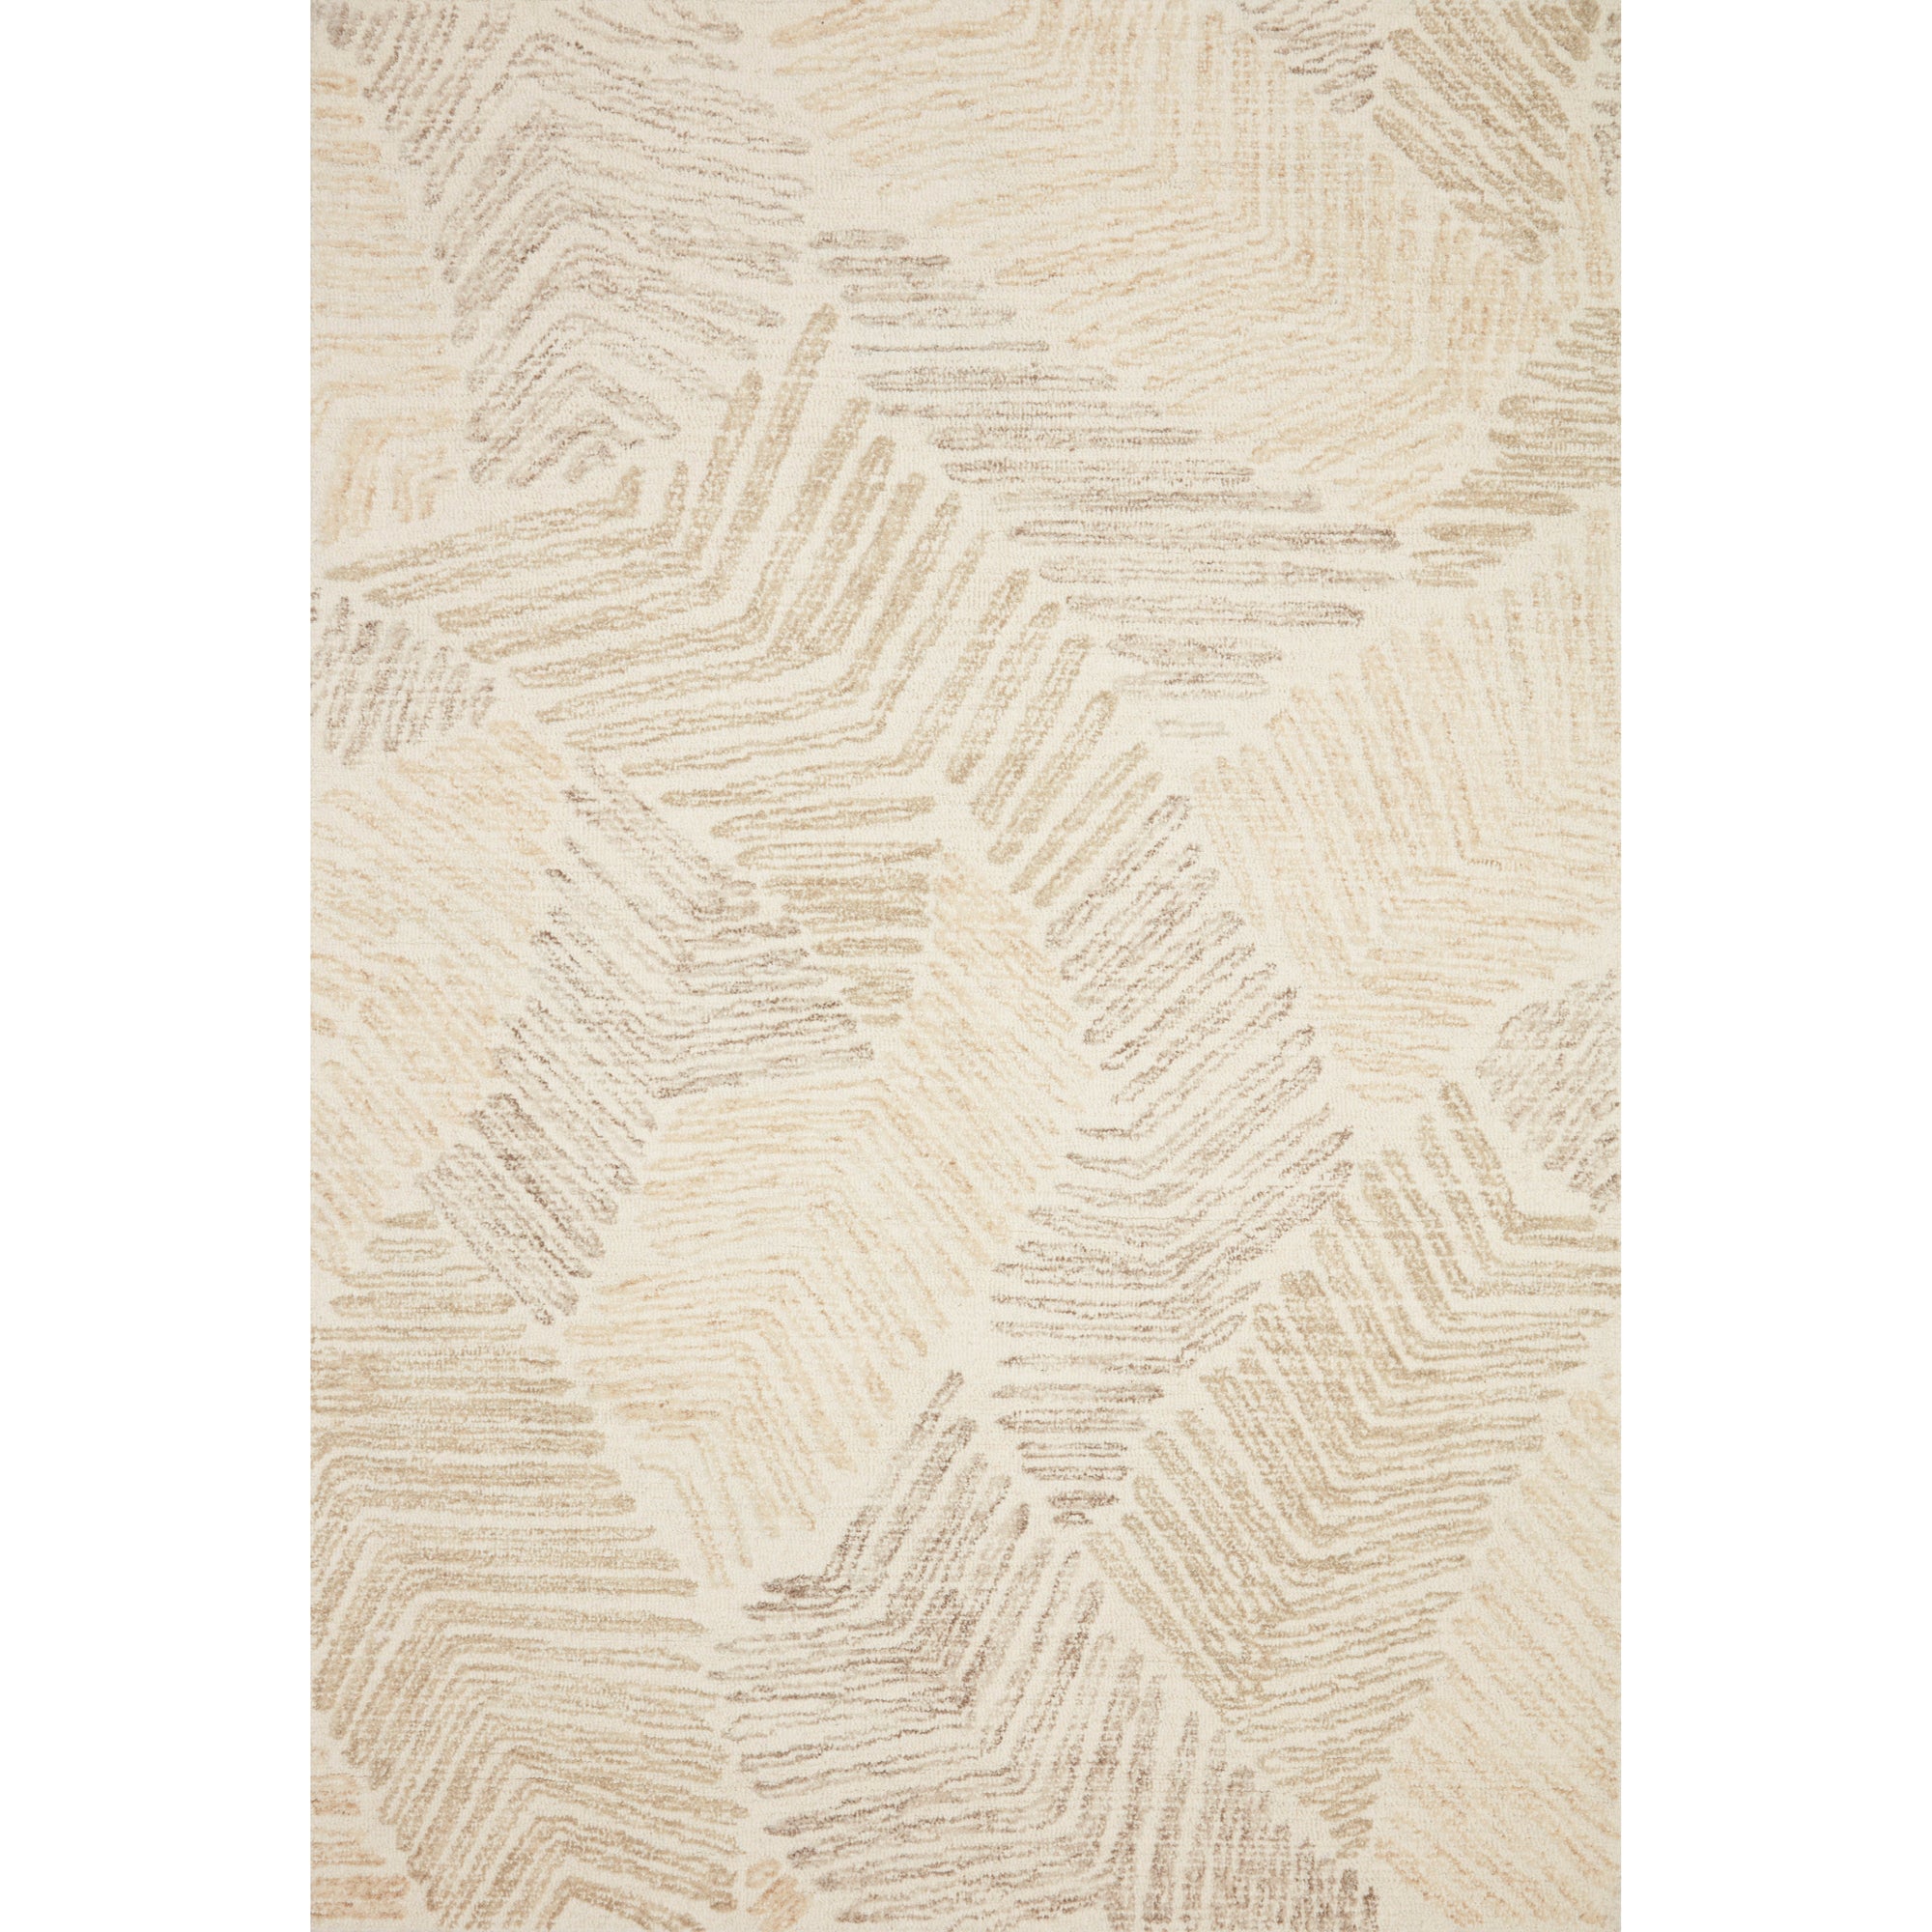 Rugs by Roo Loloi Milo Olive Natural Area Rug in size 18" x 18" Sample